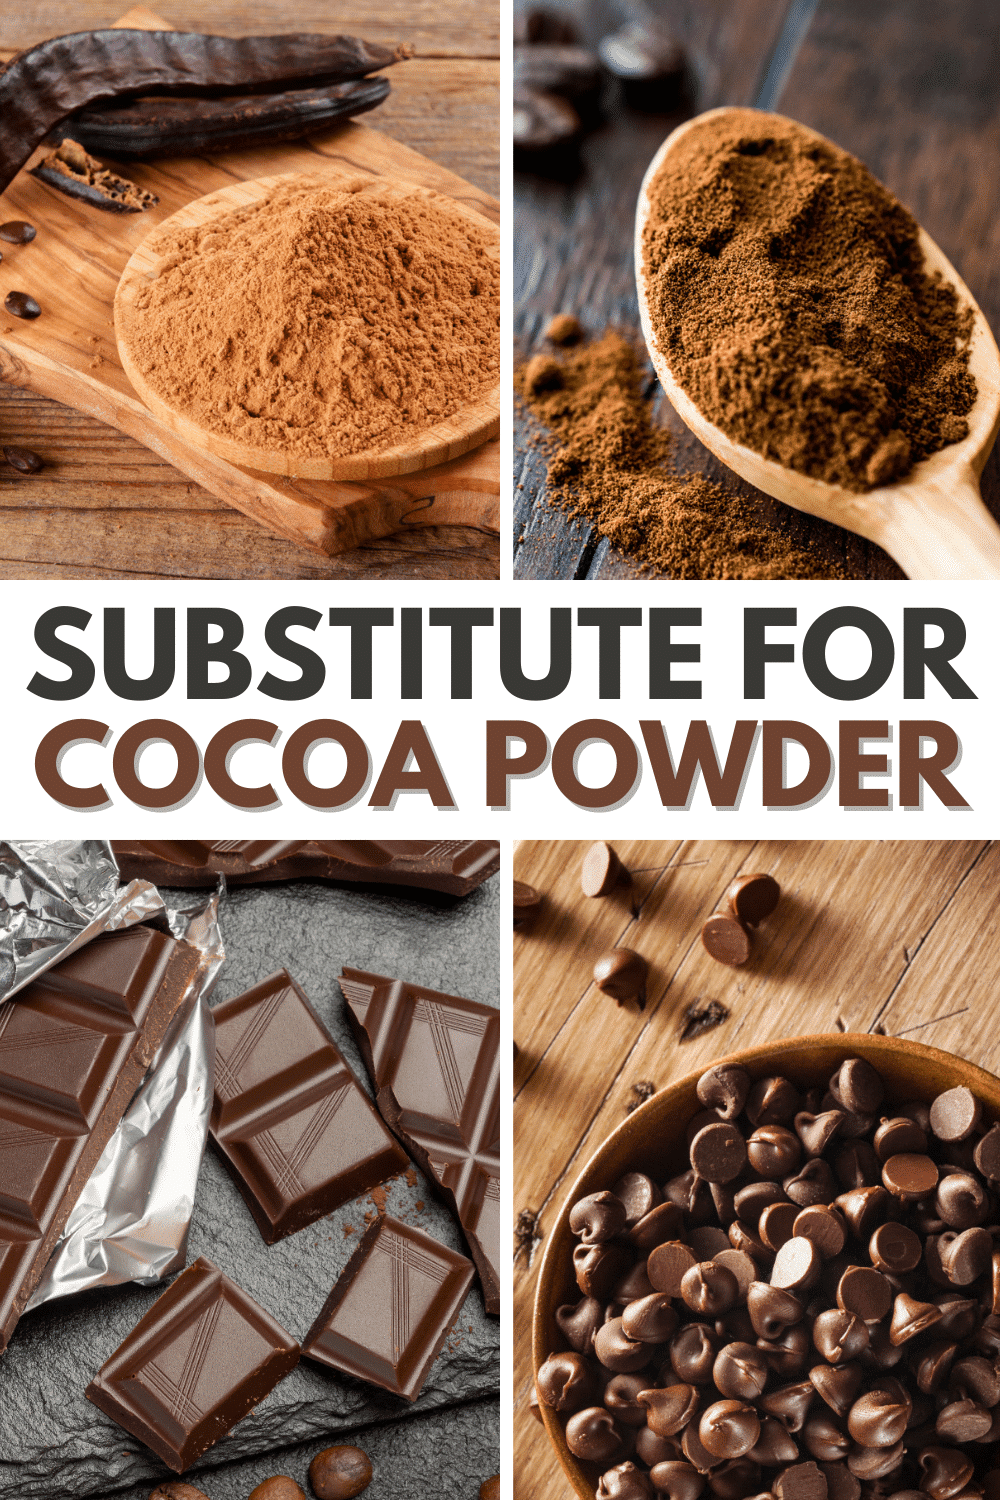 Substitute for cocoa powder.